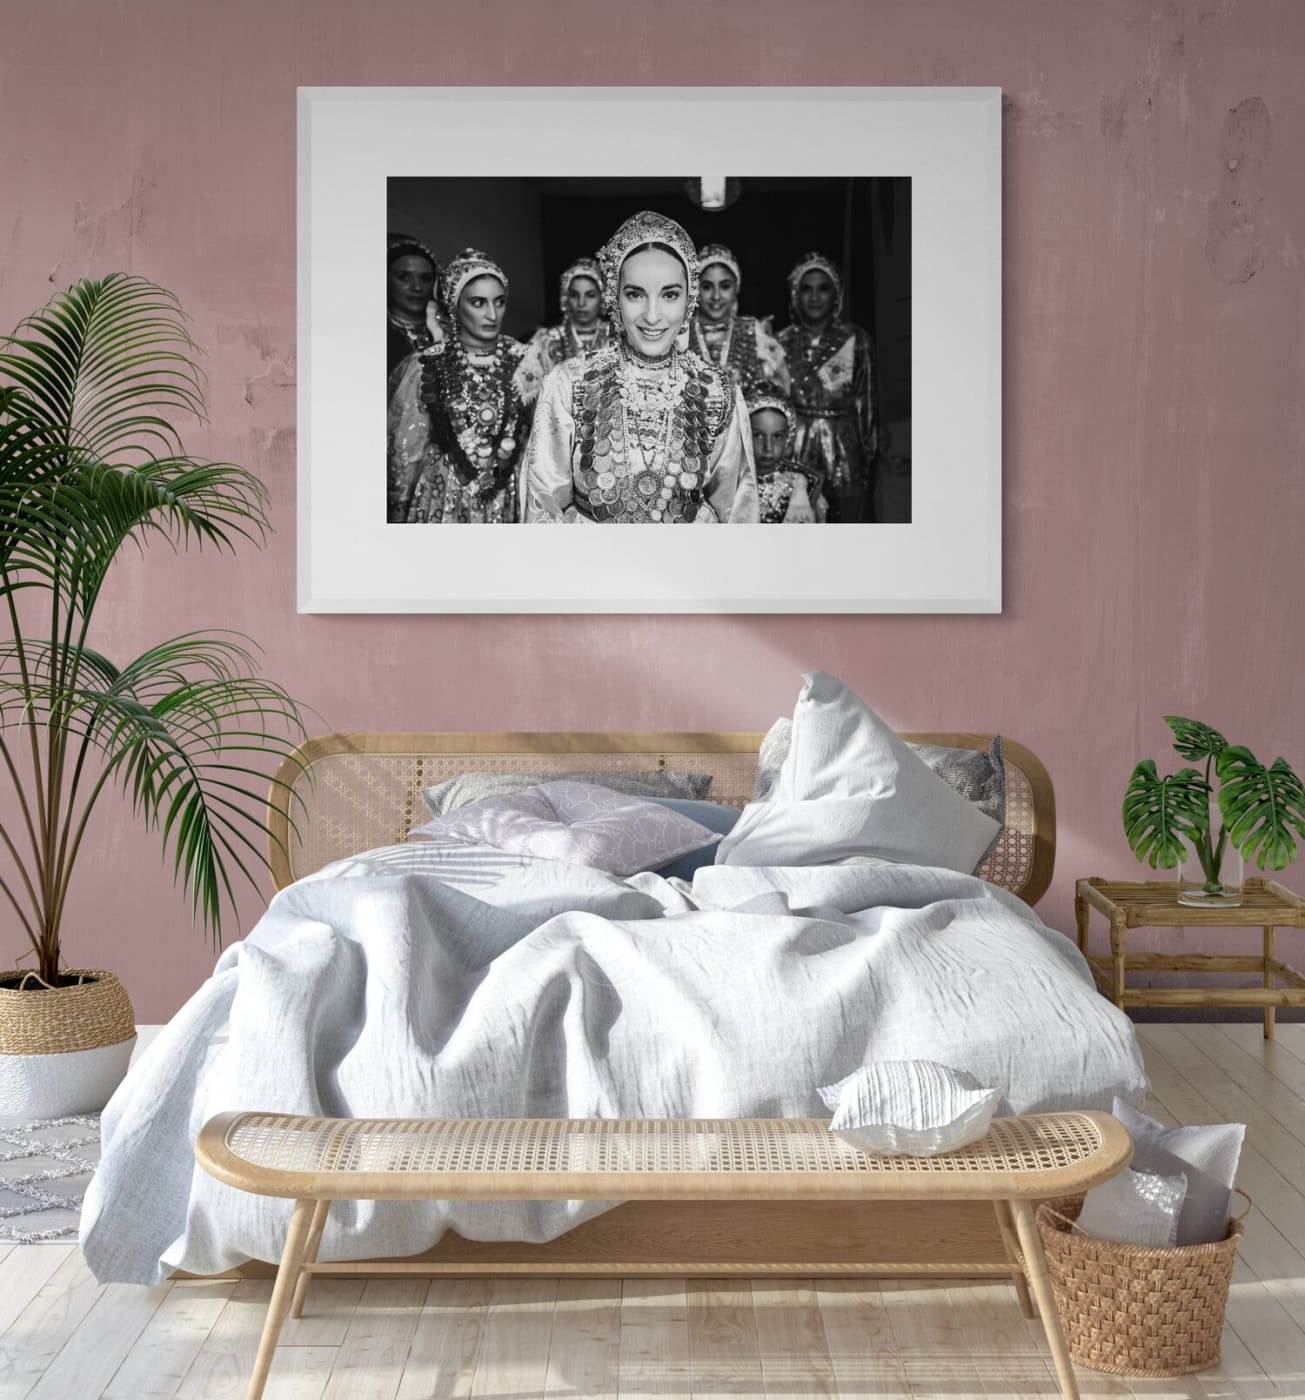 Black and White Photography Wall Art Greece | Limited Edition numbered signed. Bride in Diafani Olympos Karpathos Dodecanese.